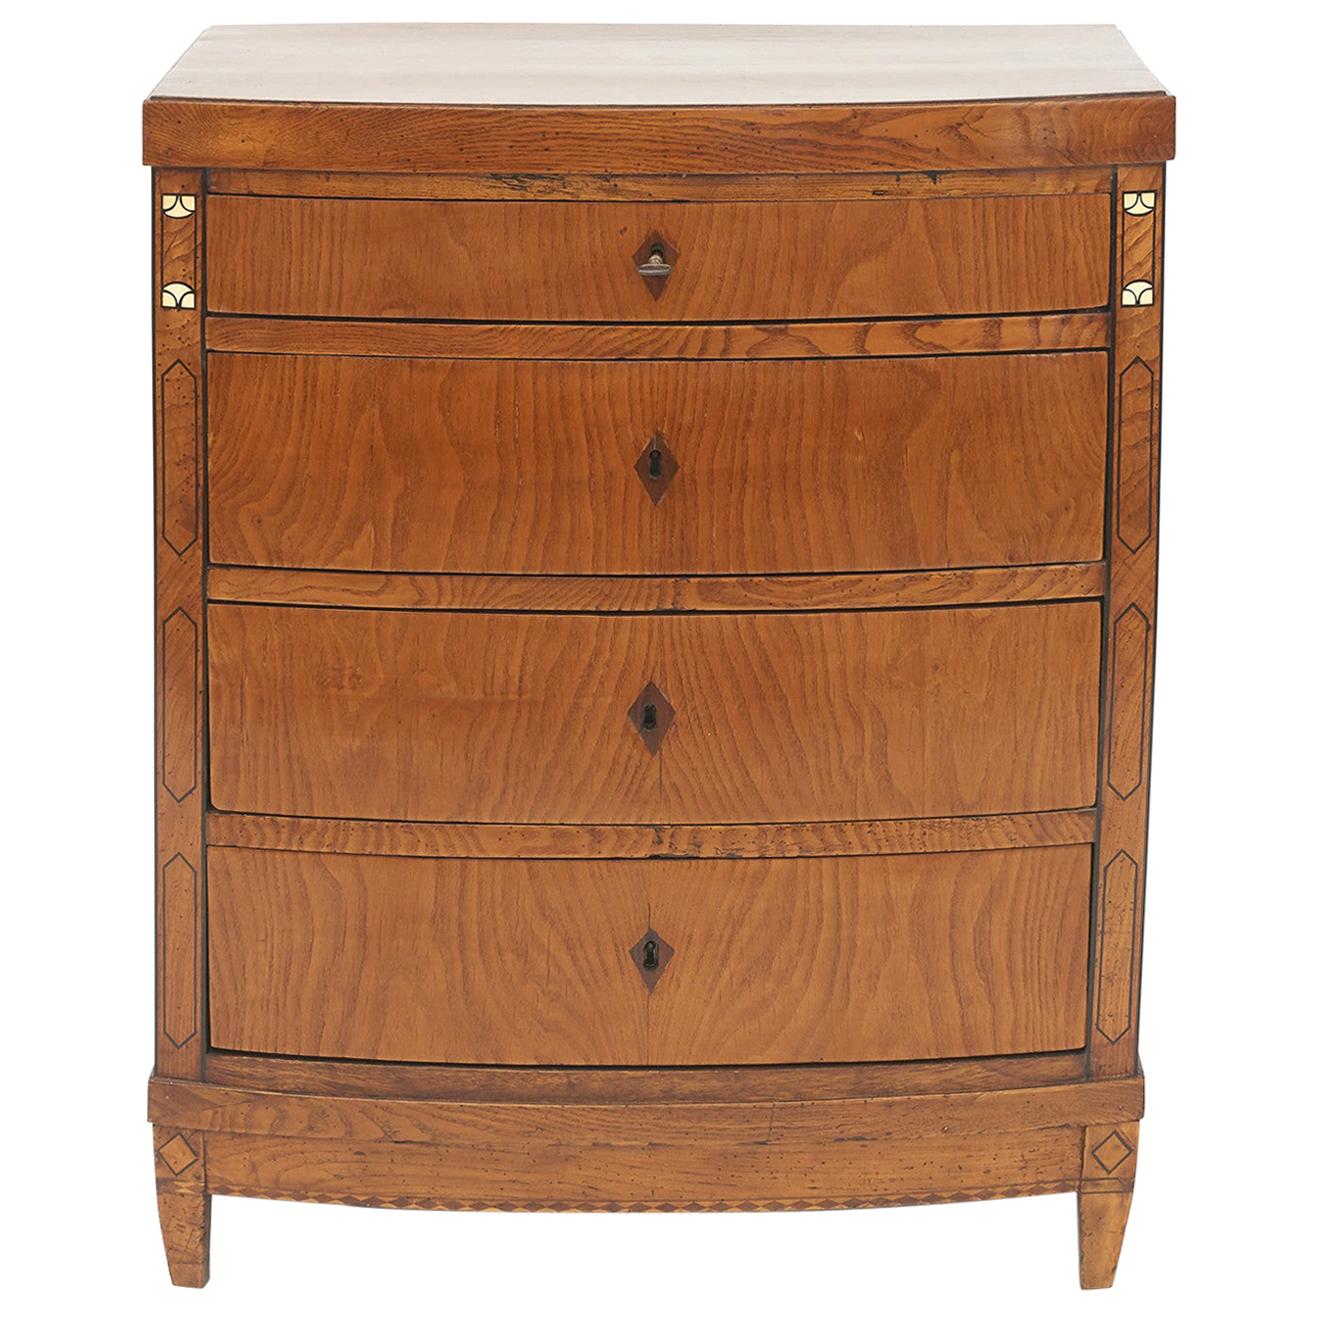 Danish Empire Chest of Drawers with Curved Front, circa 1810